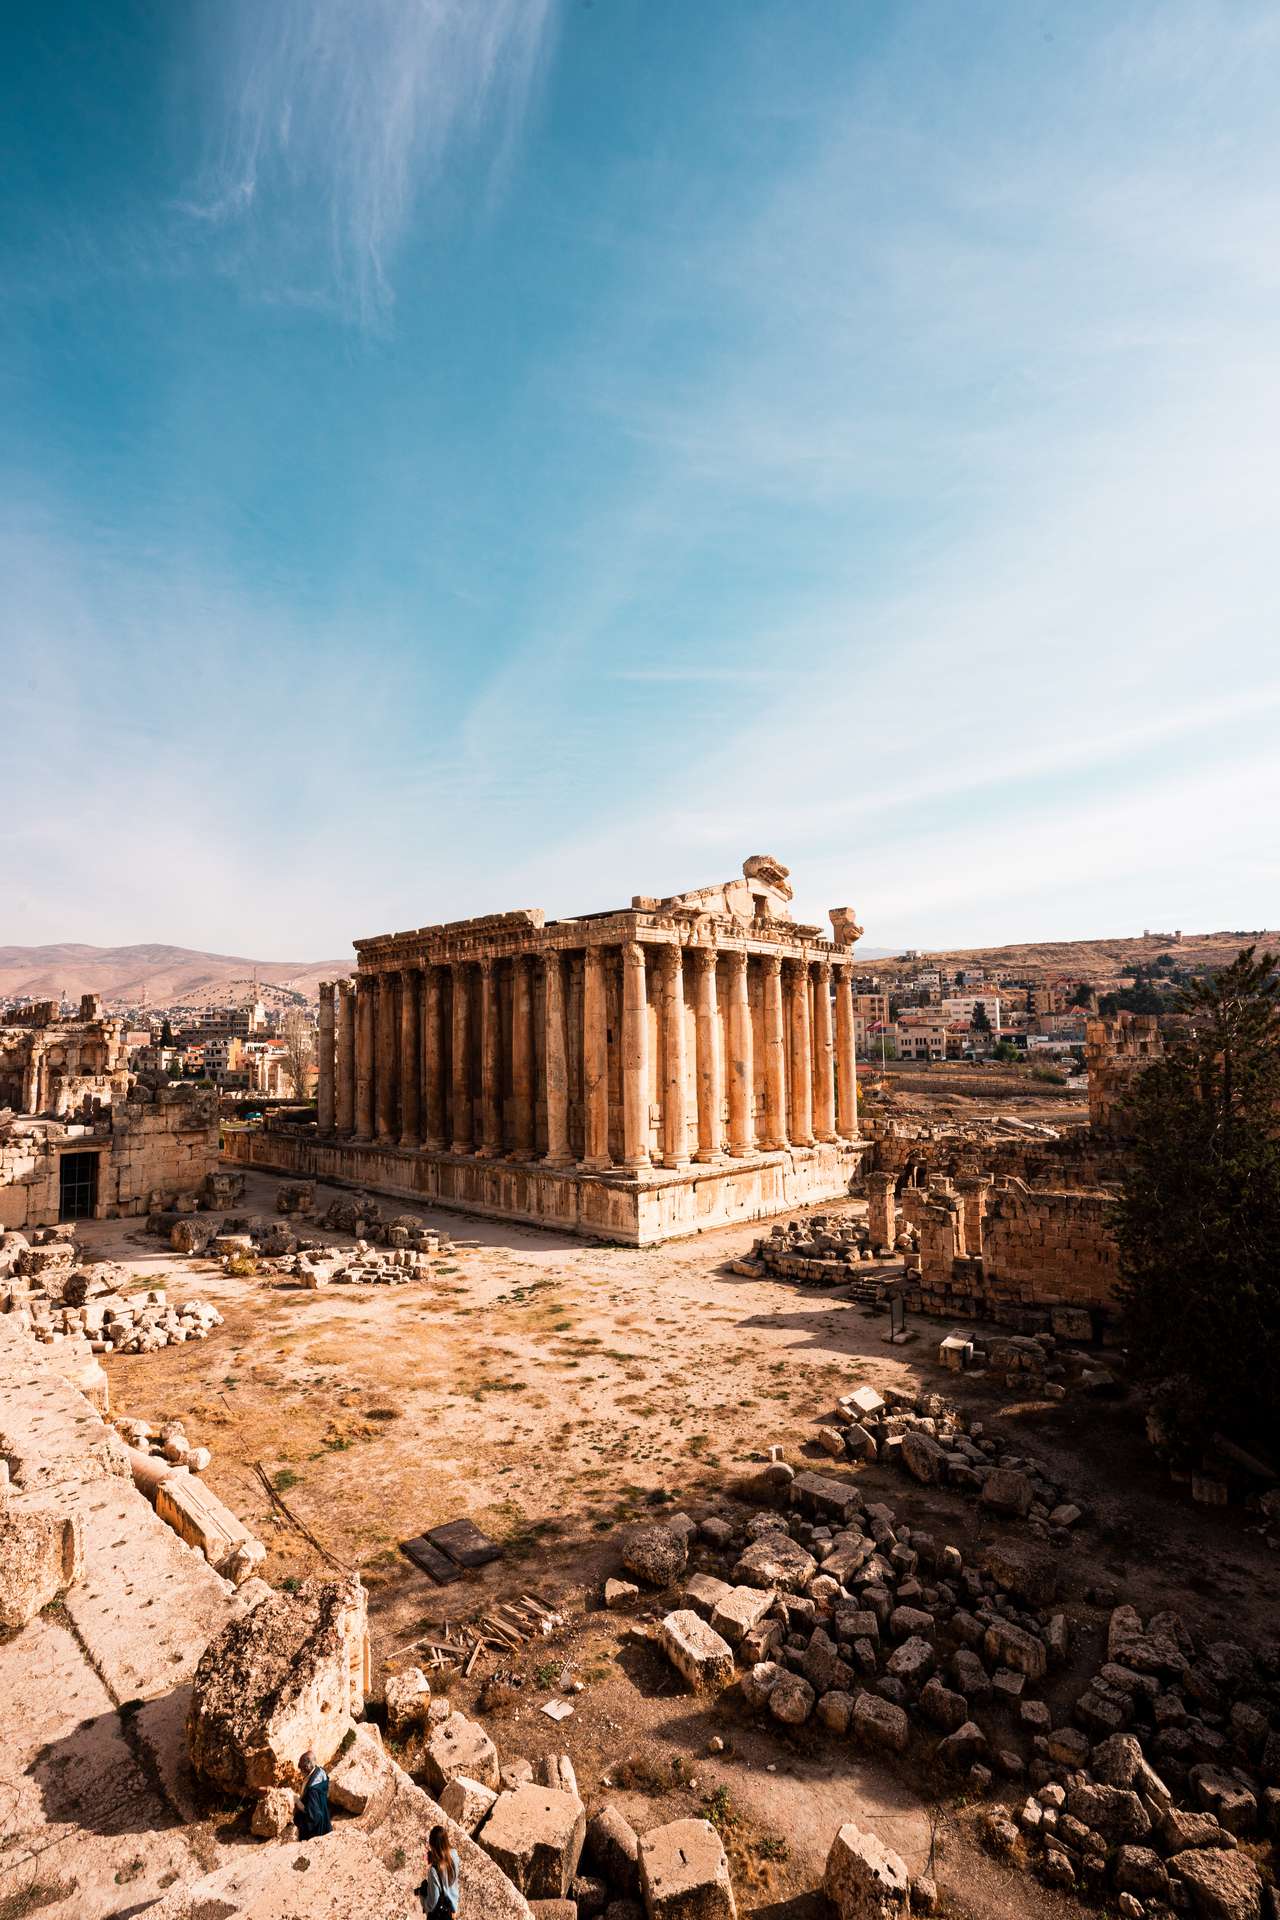 The temple ruins in Baalbek, Lebanon. The worst driver and Baalbek